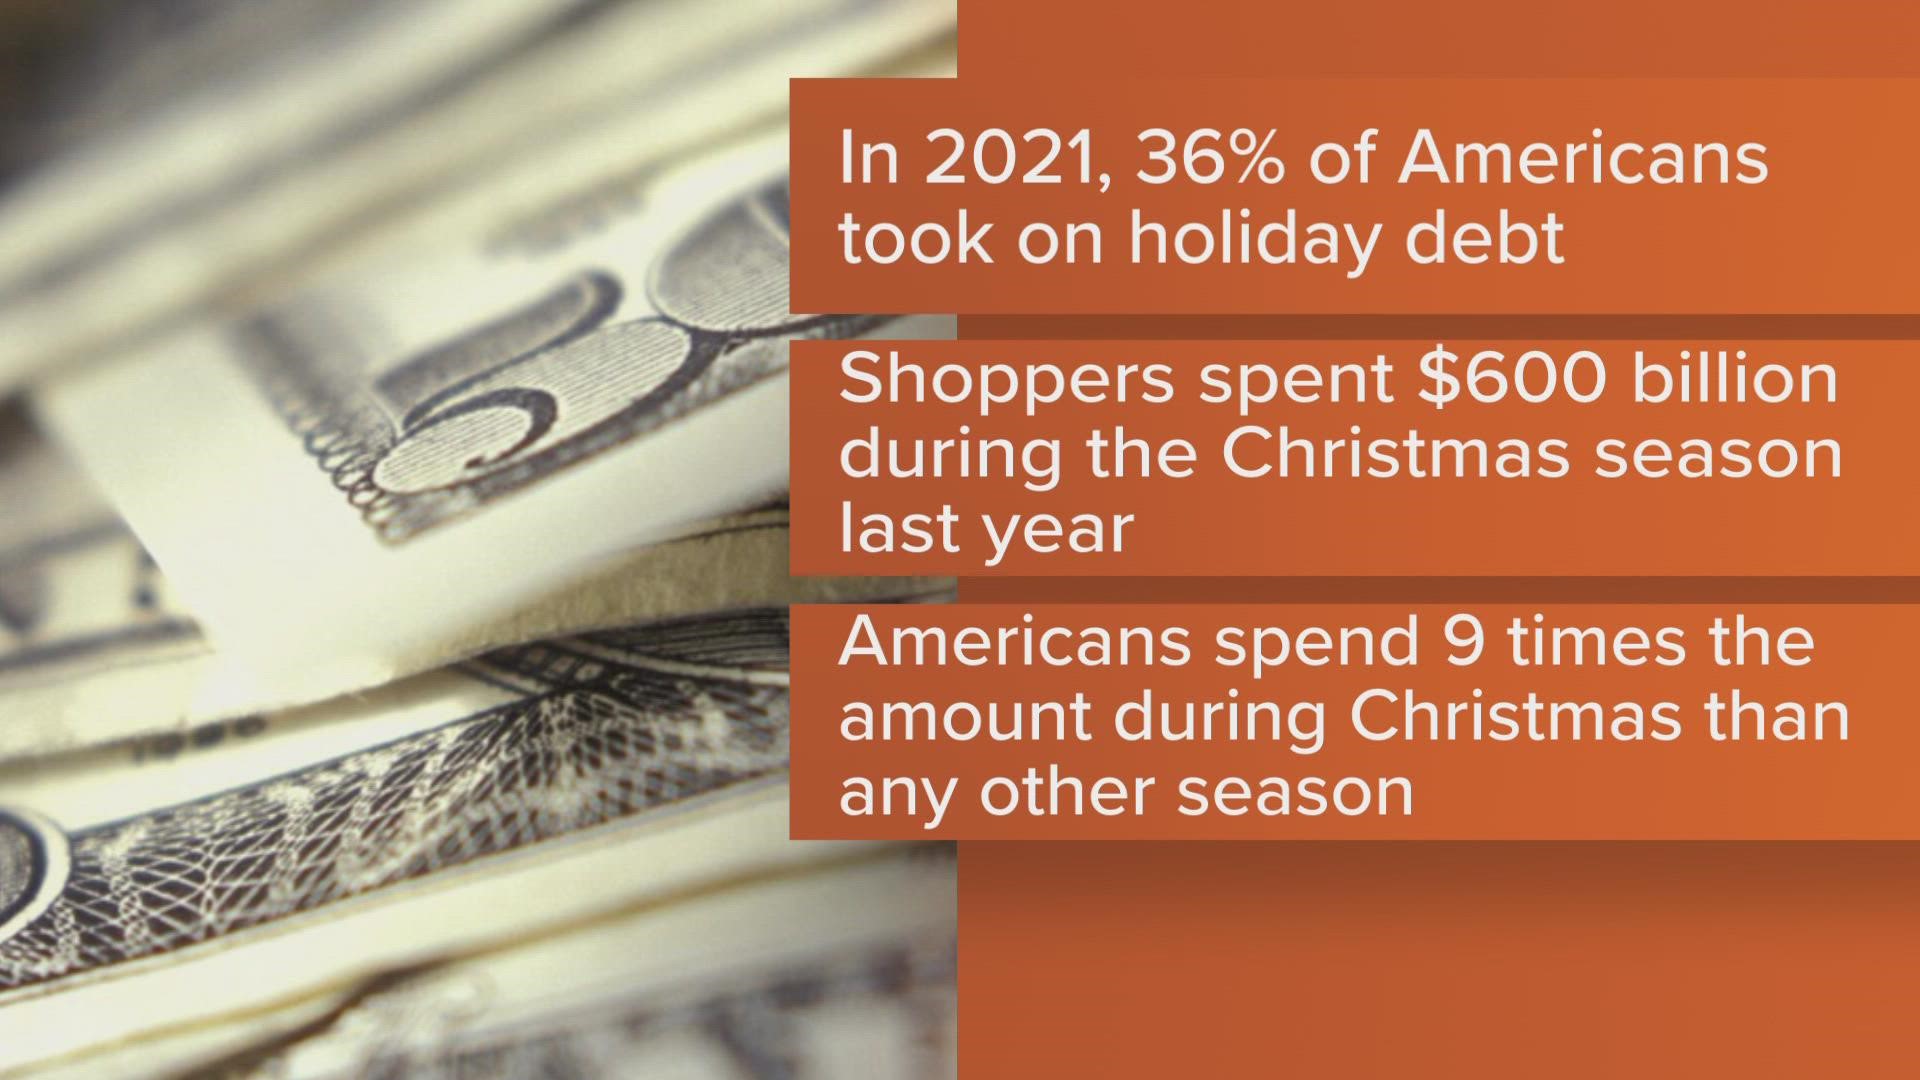 Shoppers spent $600 billion during the Christmas season last year. The next highest seasonal total was the “Back to School” shopping season at $72